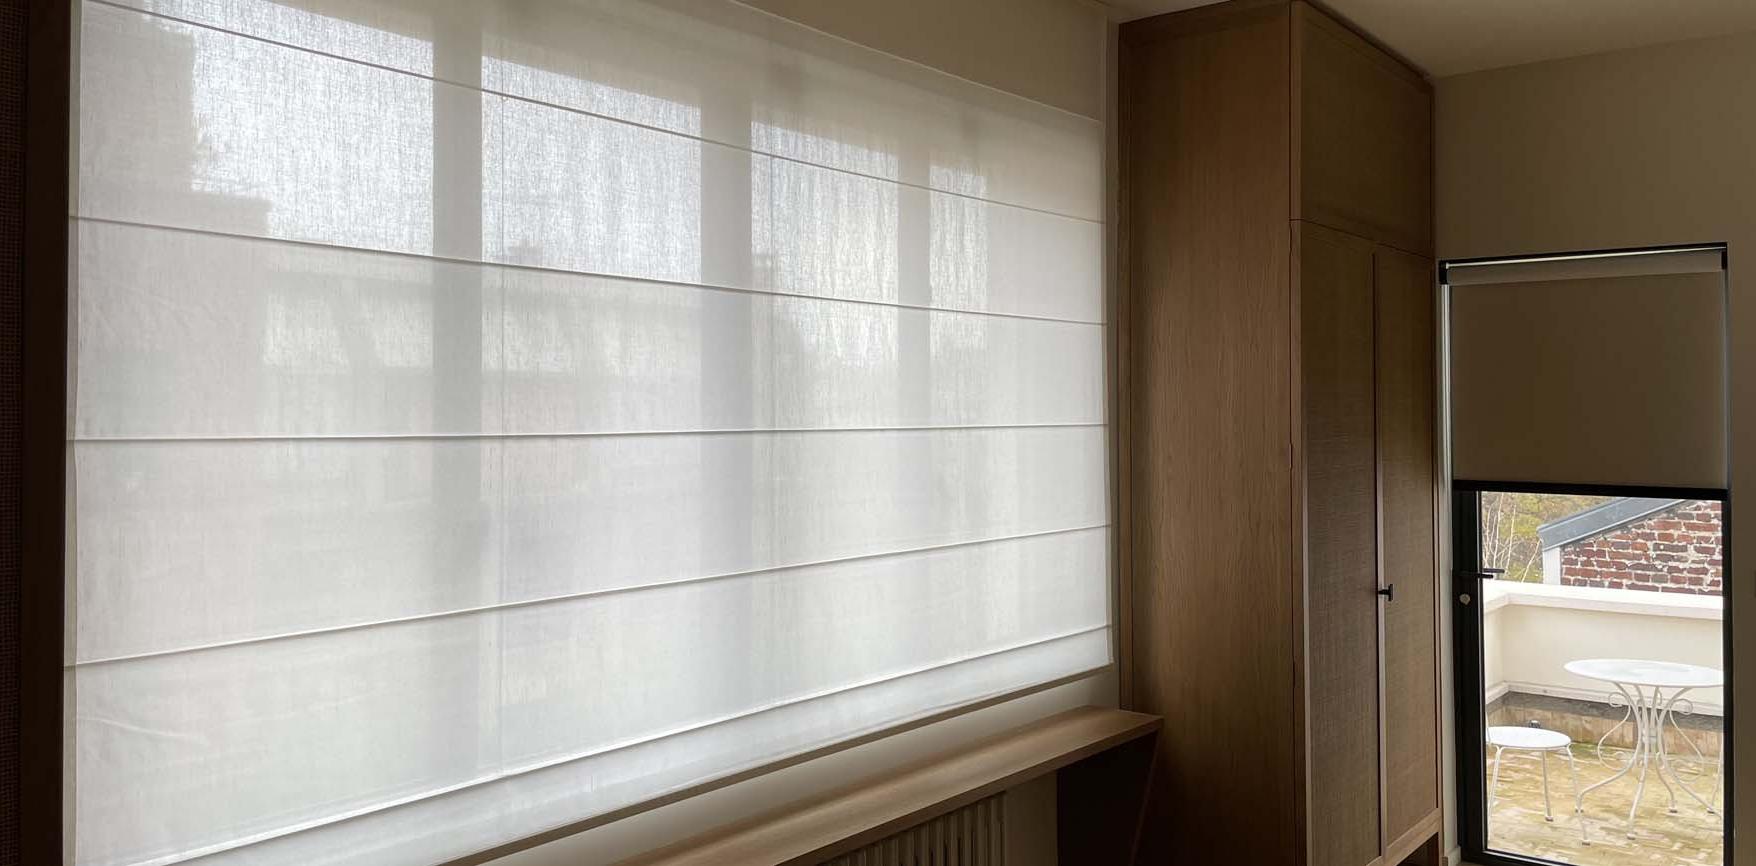 In the master bedroom, a wide roman blind covers the window to filter the view.